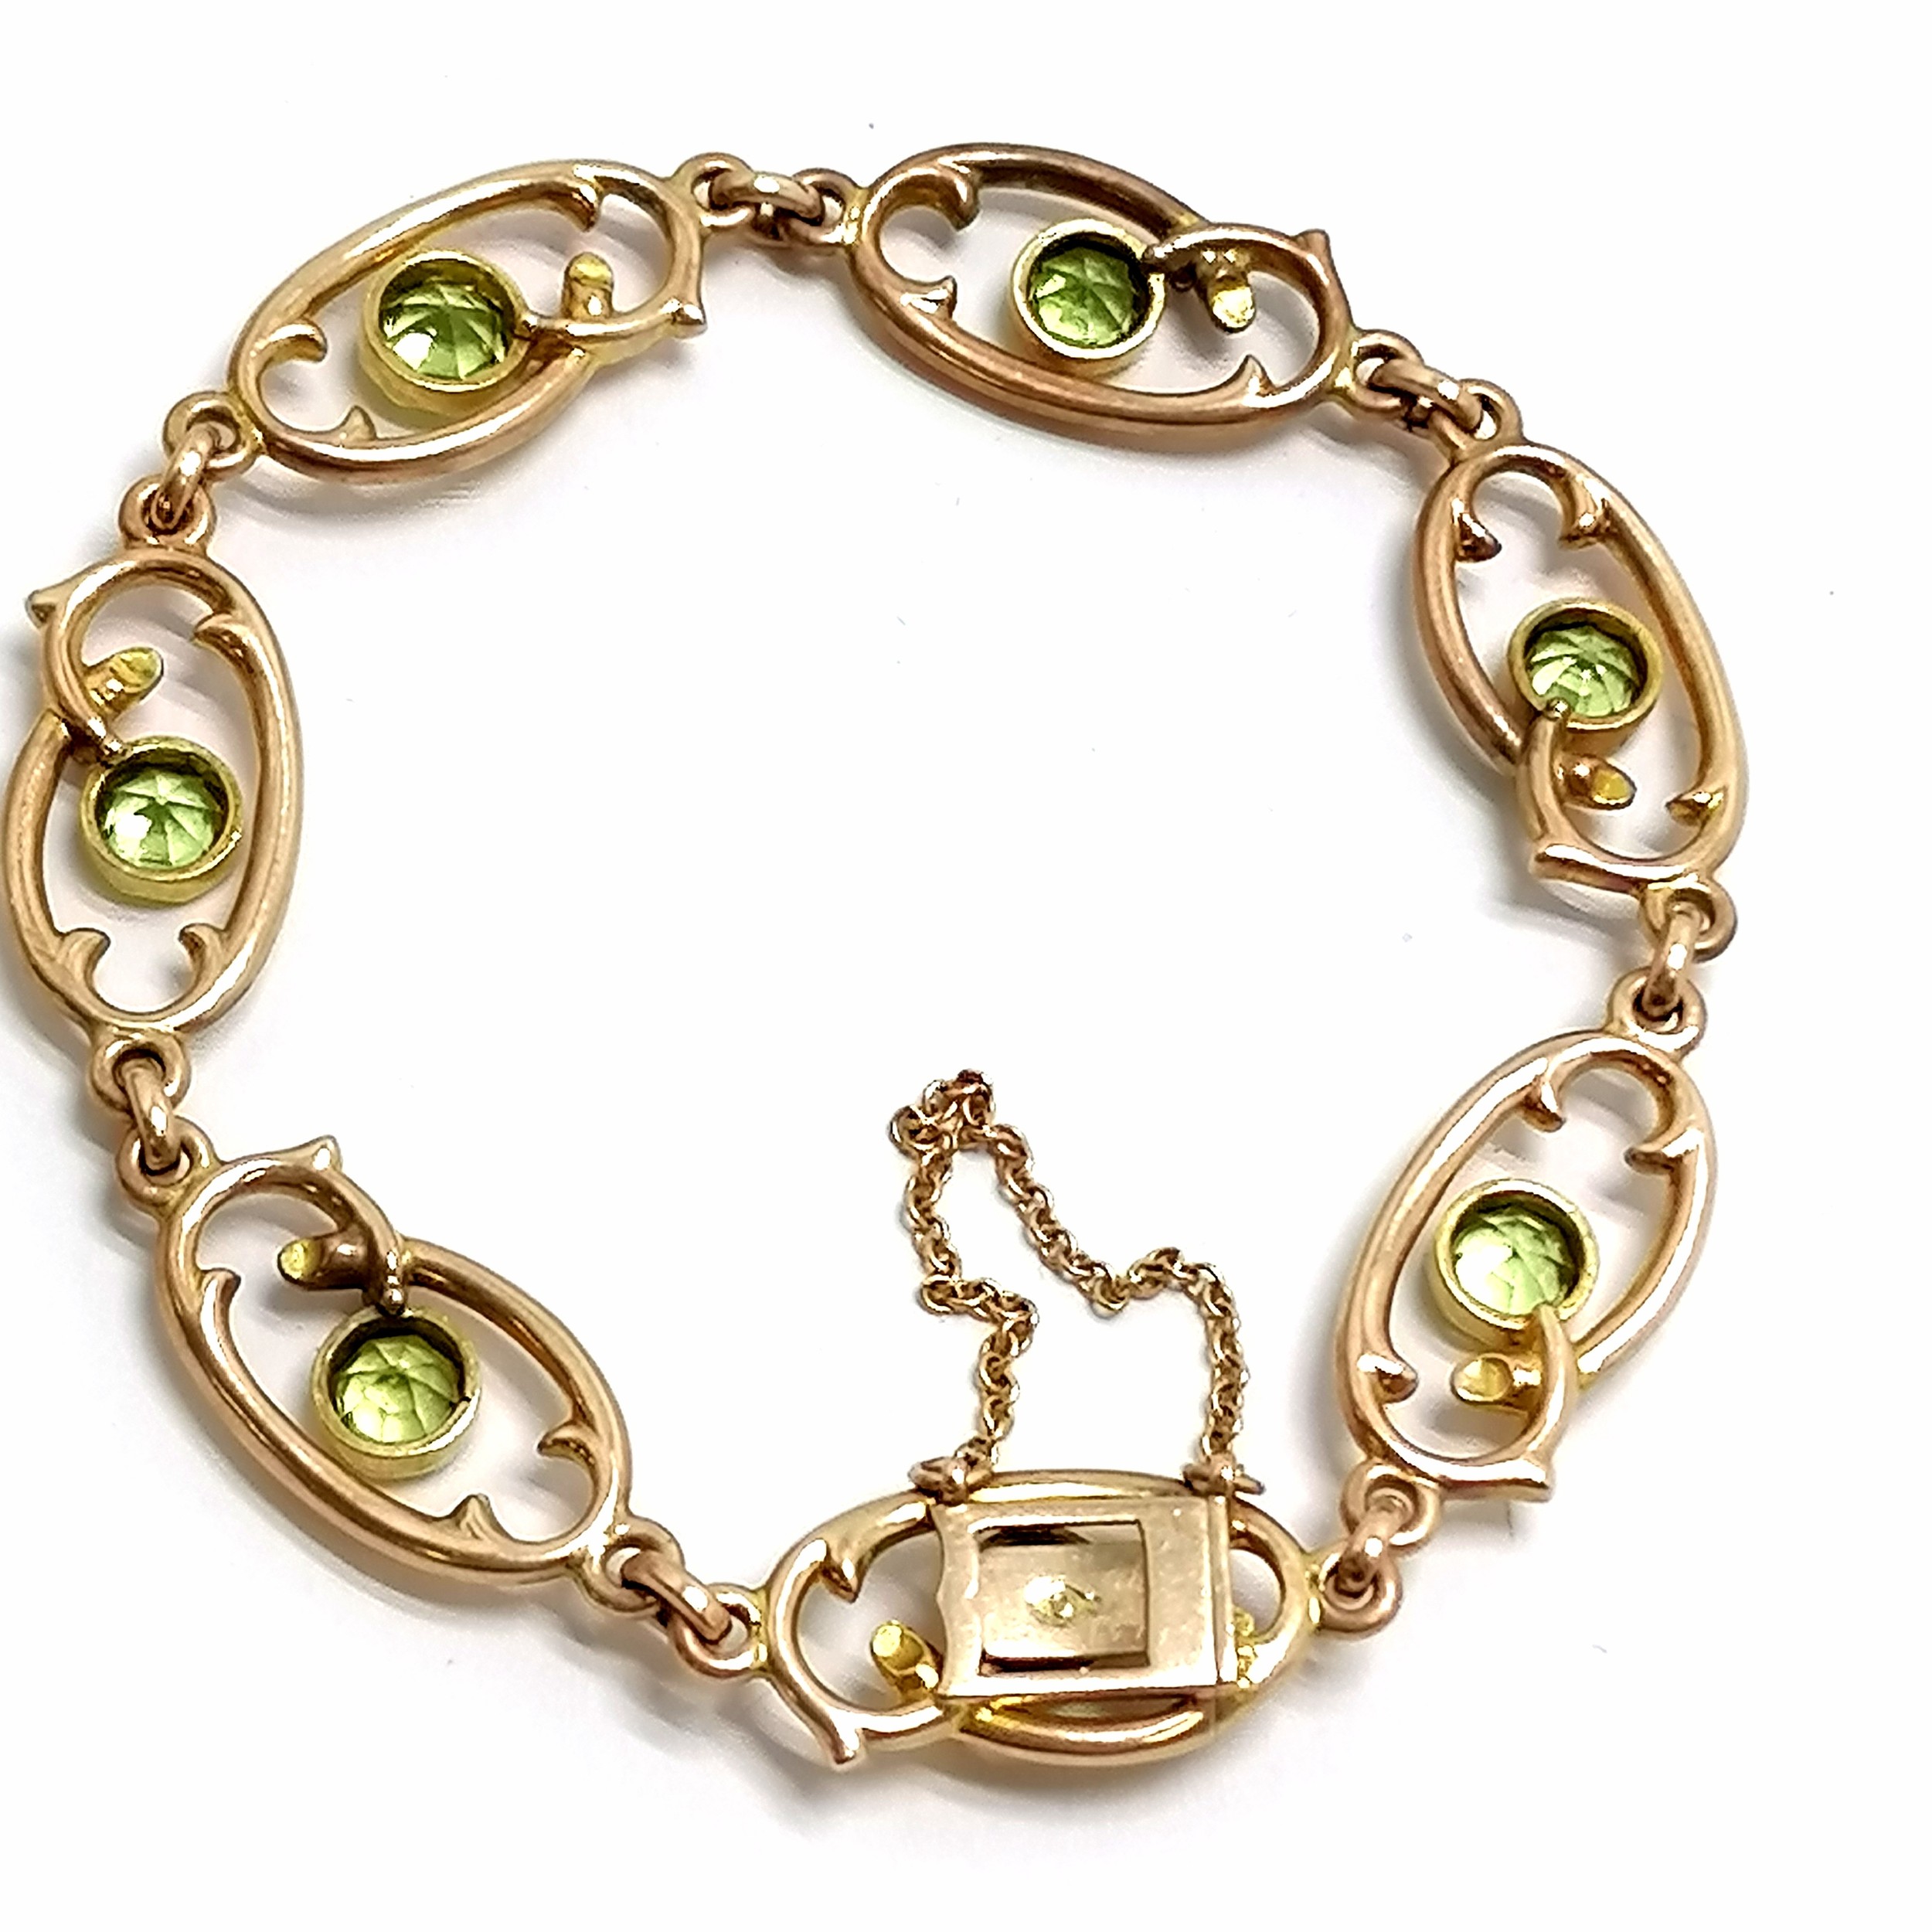 Antique Art Nouveau 9ct marked gold bracelet set with peridot in an original F Horstmann (Guildford) - Image 2 of 5